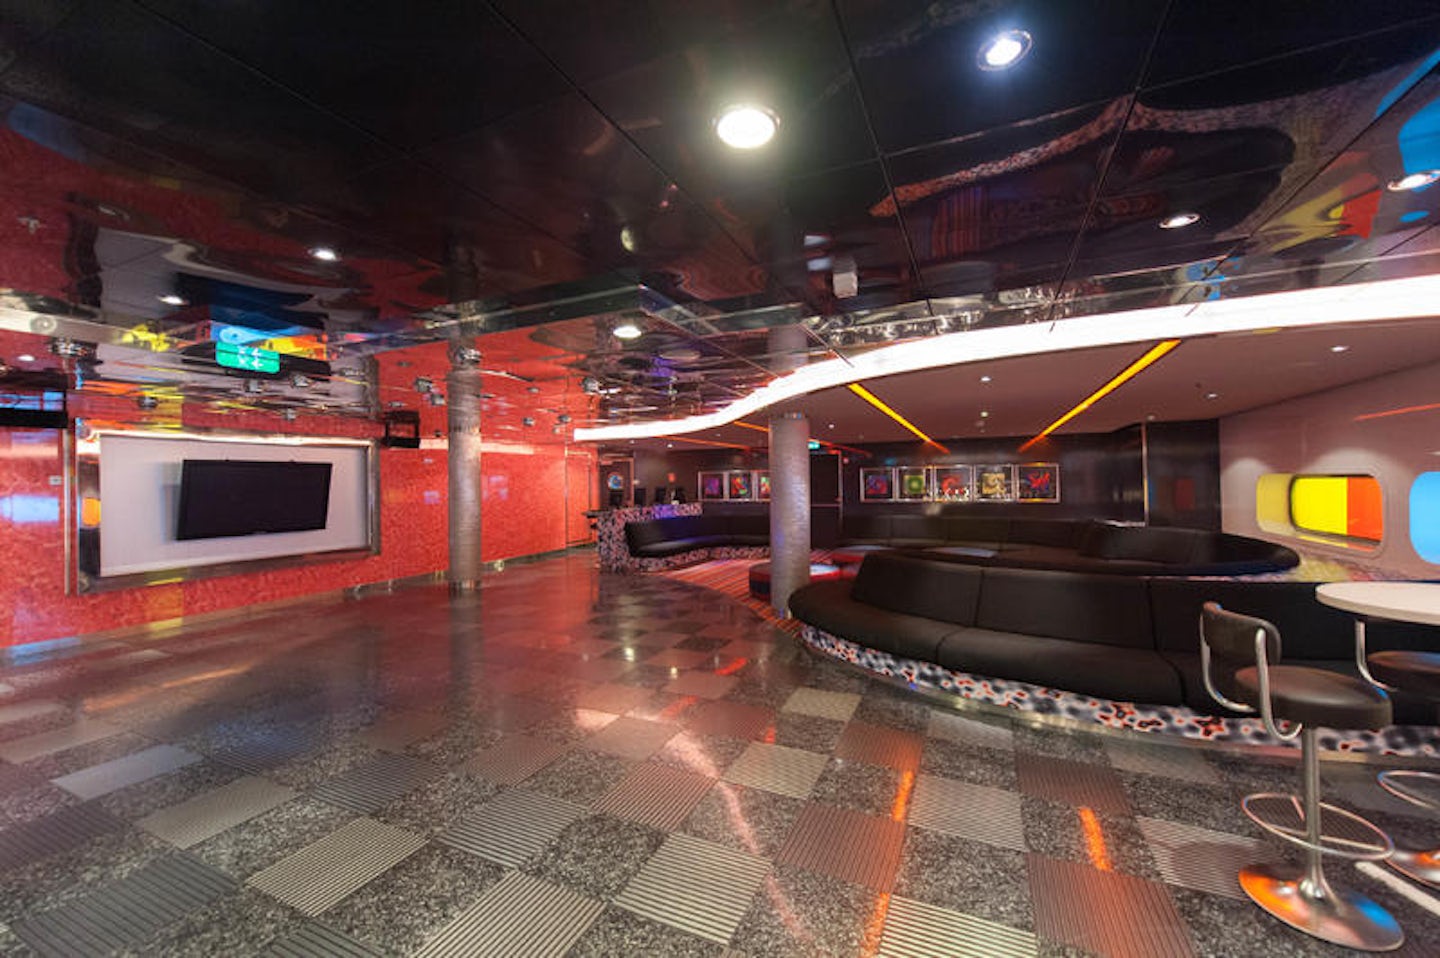 Fuel Teen Disco on Allure of the Seas